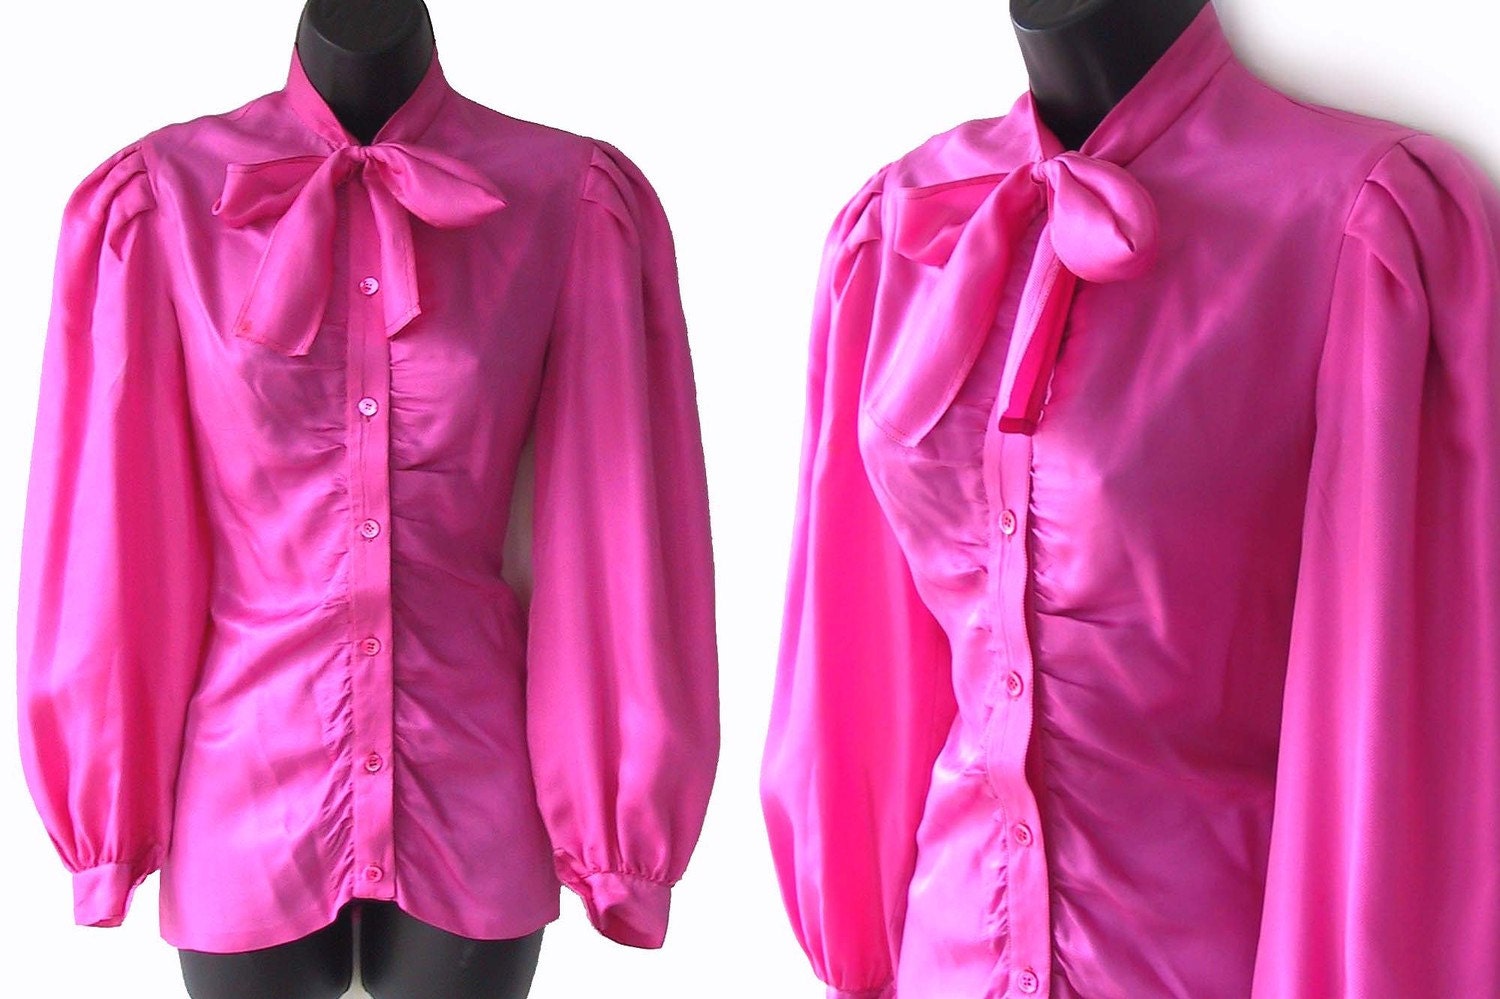 Vintage 70s 80s PINK Ruched Ascot Tie Silk BLOUSE XS S - heidihodge